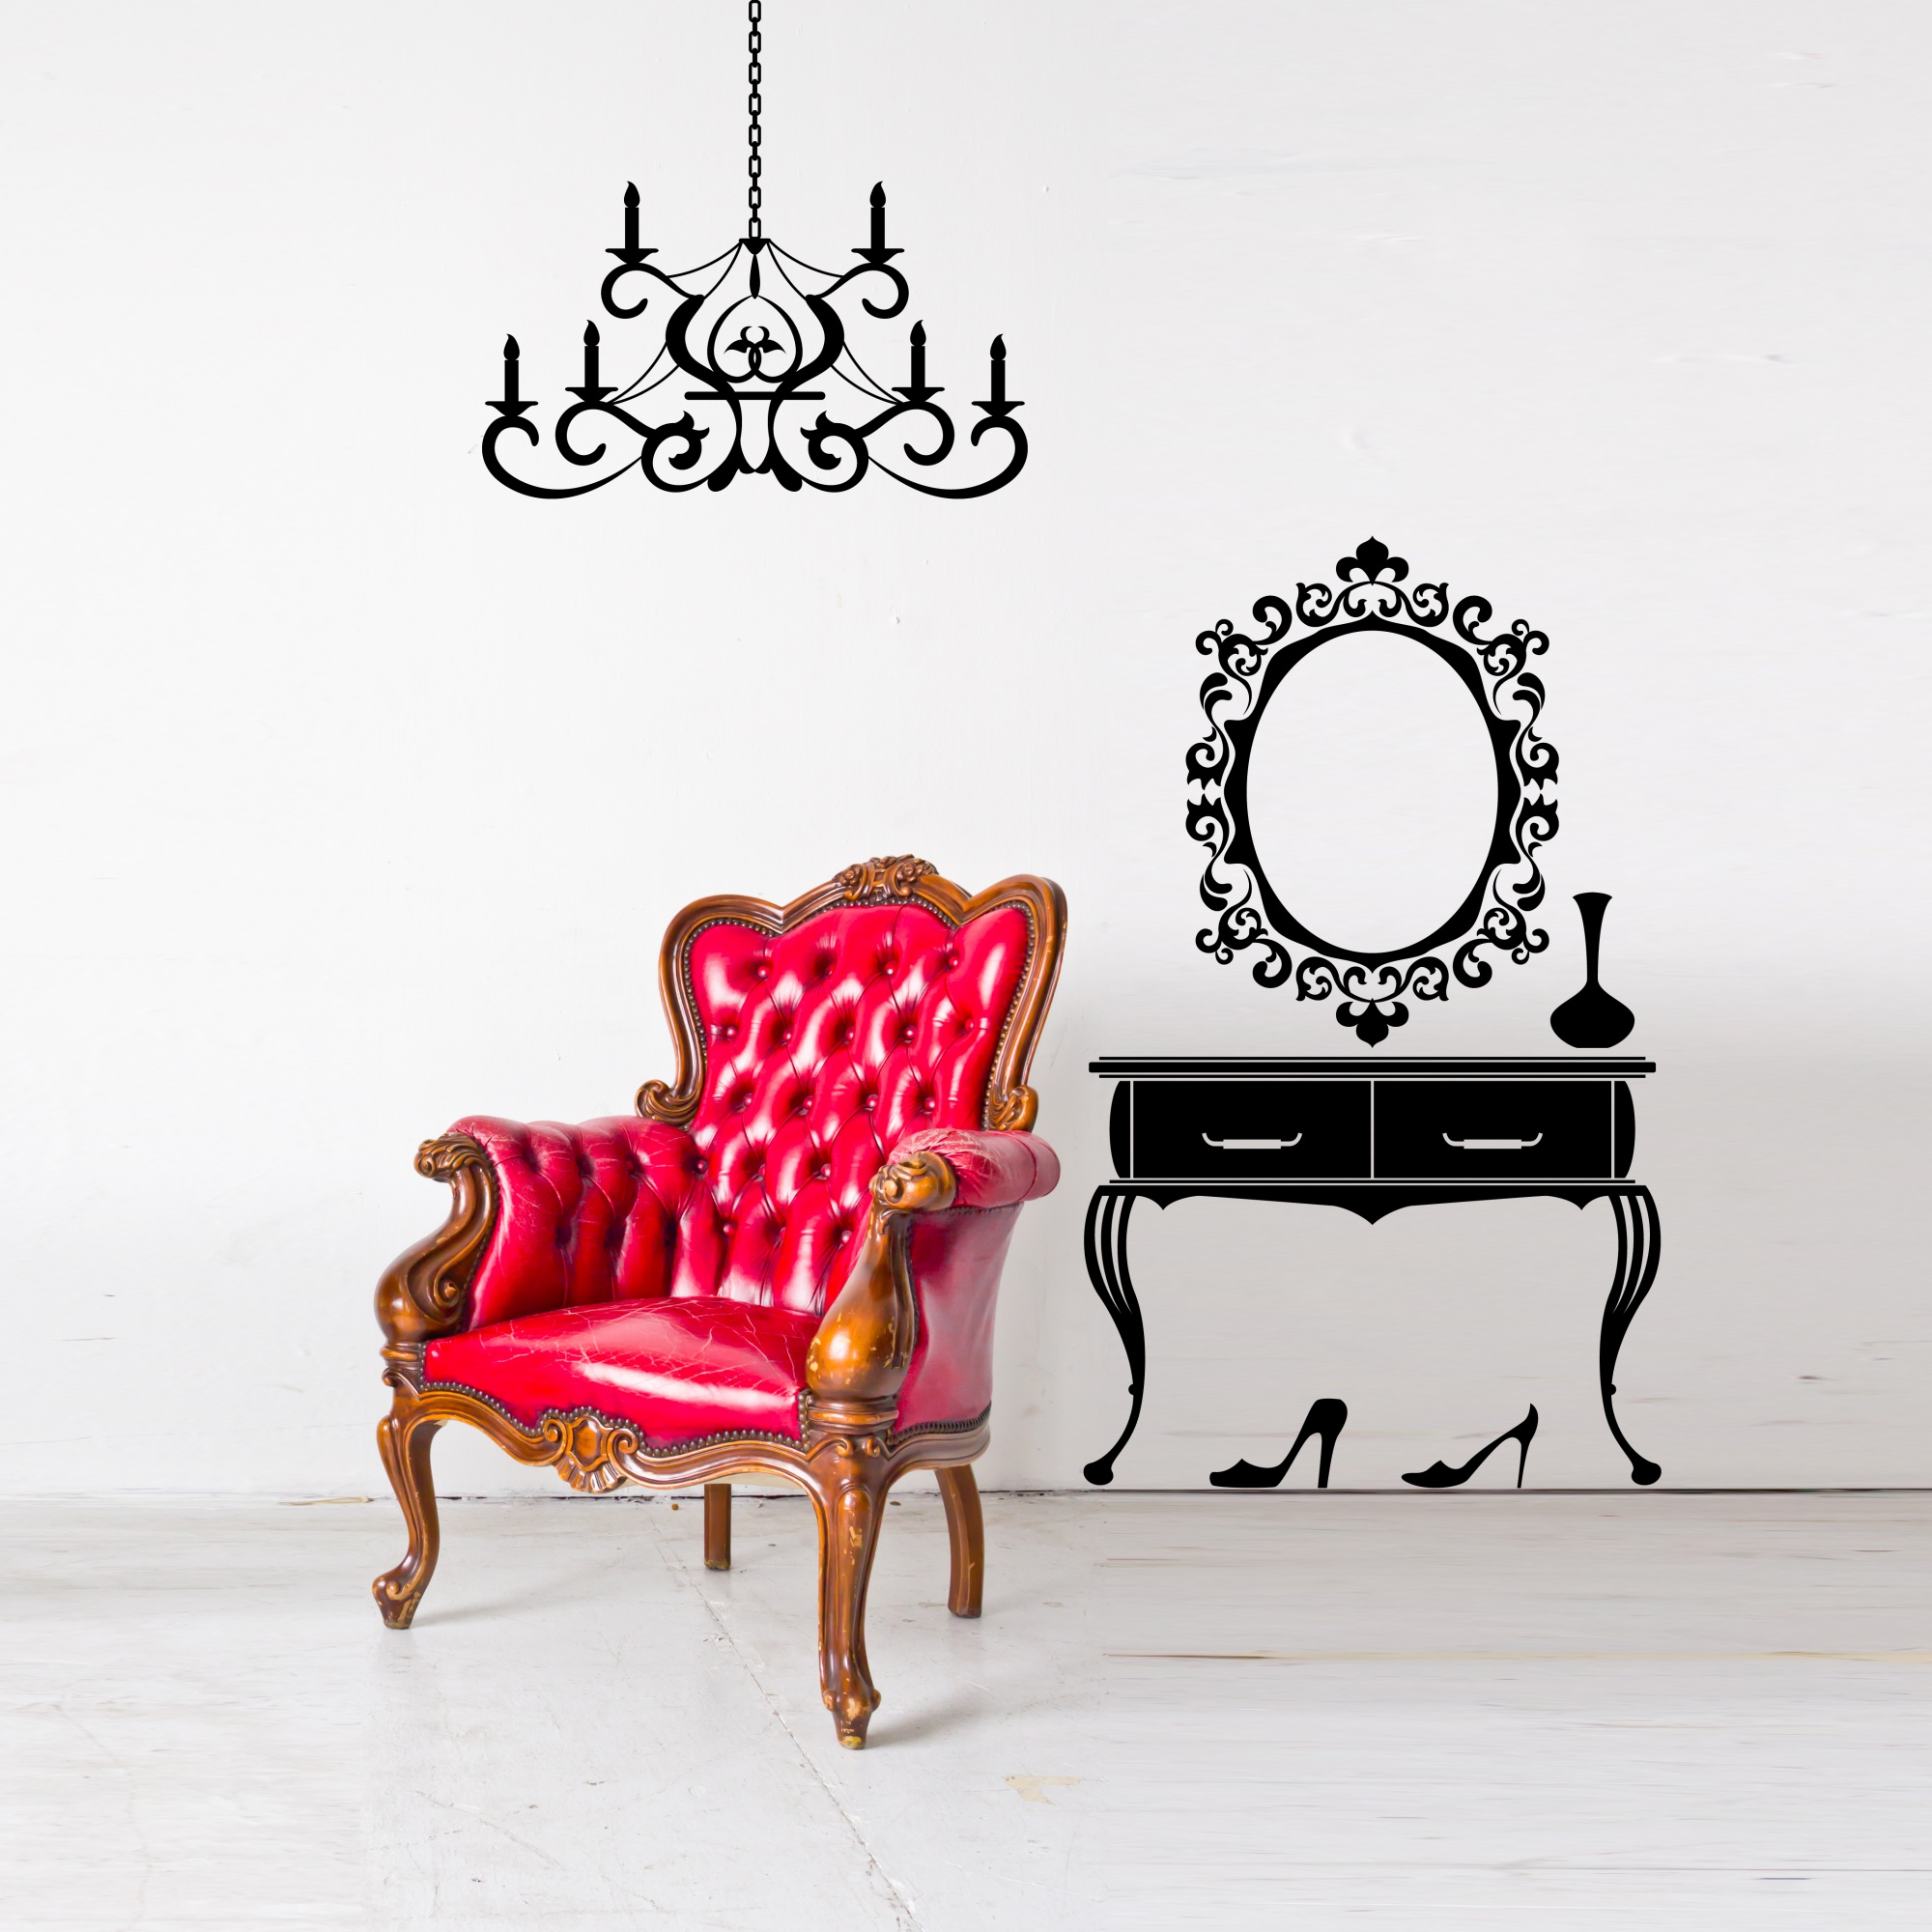 6 of the best Wall Stickers